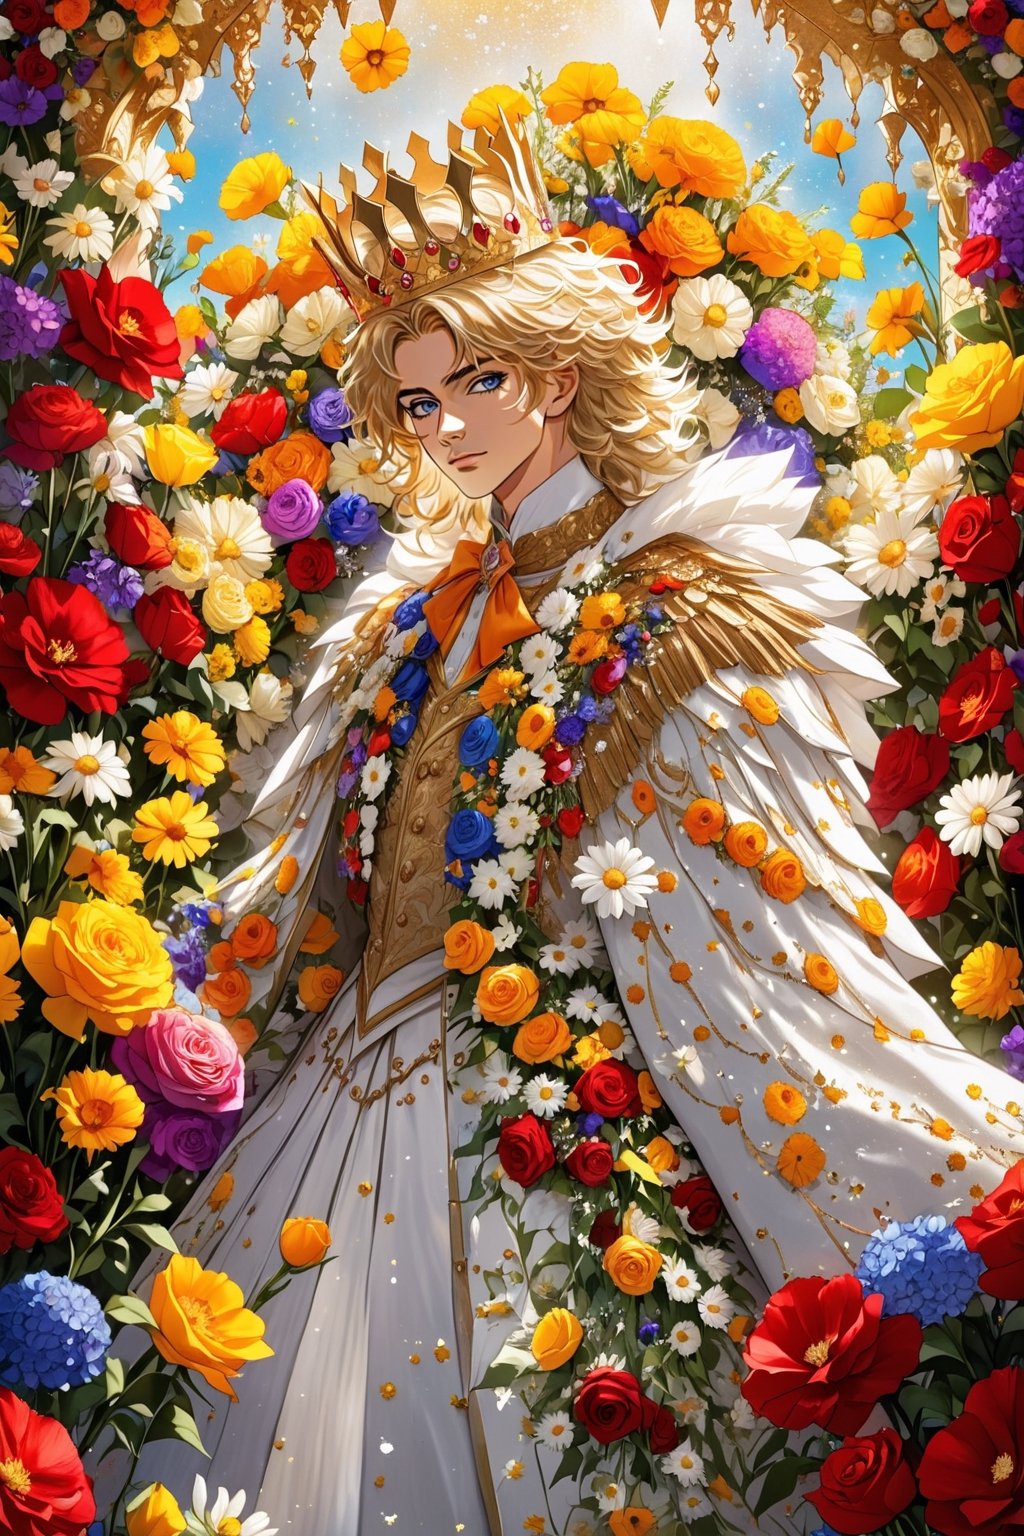 A prince made entirely of flowers, his suit a vibrant array of poppies, daisies, and tulips. His hair, a cascade of marigold, adorned with a crown of hydrangea and roses. he stands tall and regal, his eyes bright with the colors of his flower kingdom. This flower prince radiates freshness and suave charisma, a whimsical and unique creation of nature's beauty.